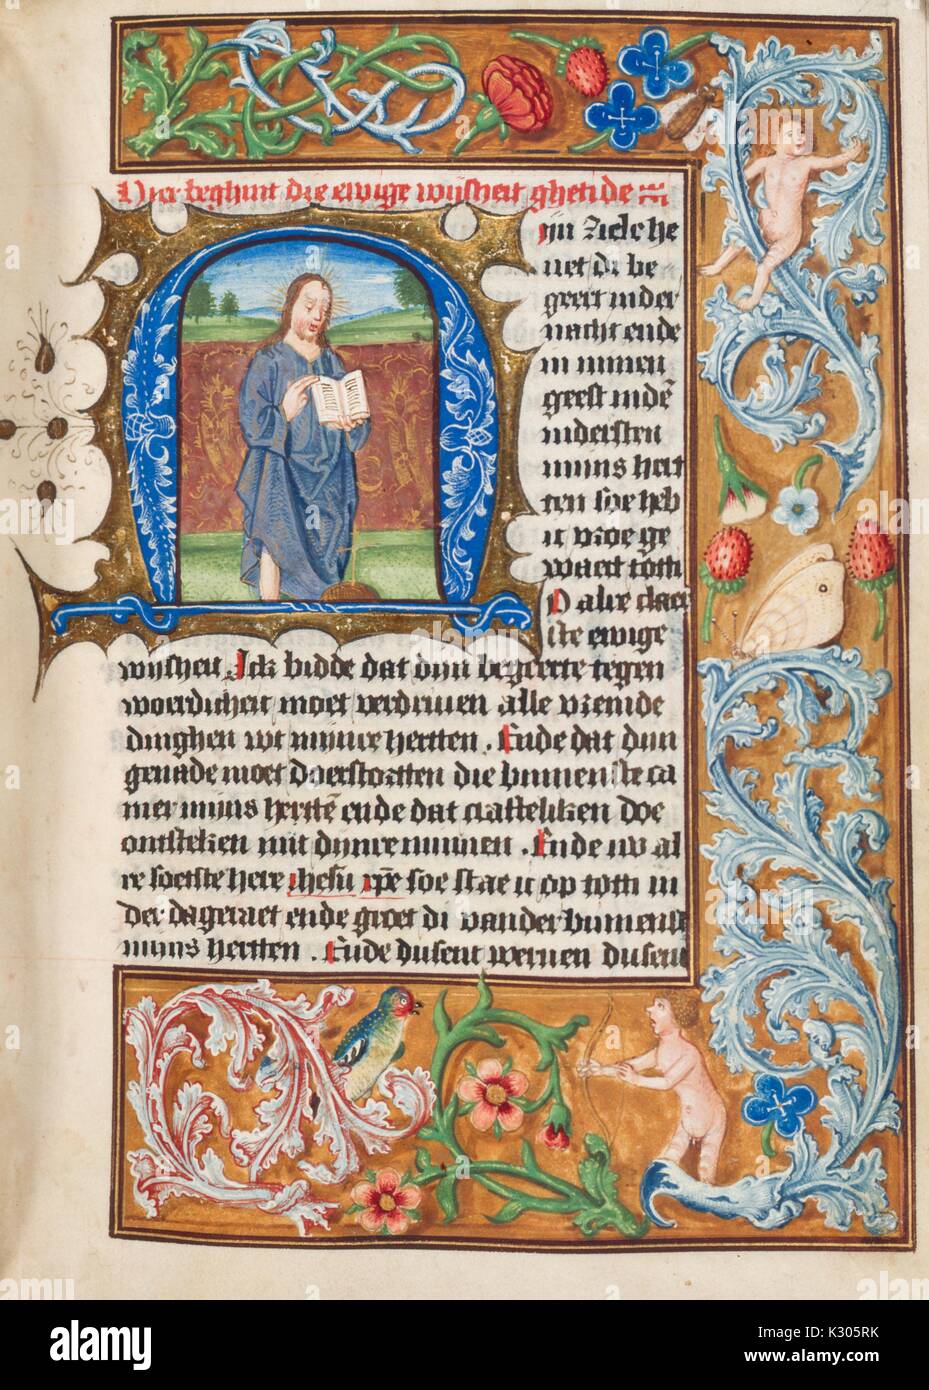 Illuminated manuscript page depicting Jesus Christ teaching with an open book, from a 15th century Dutch book of hours, 2013. Stock Photo